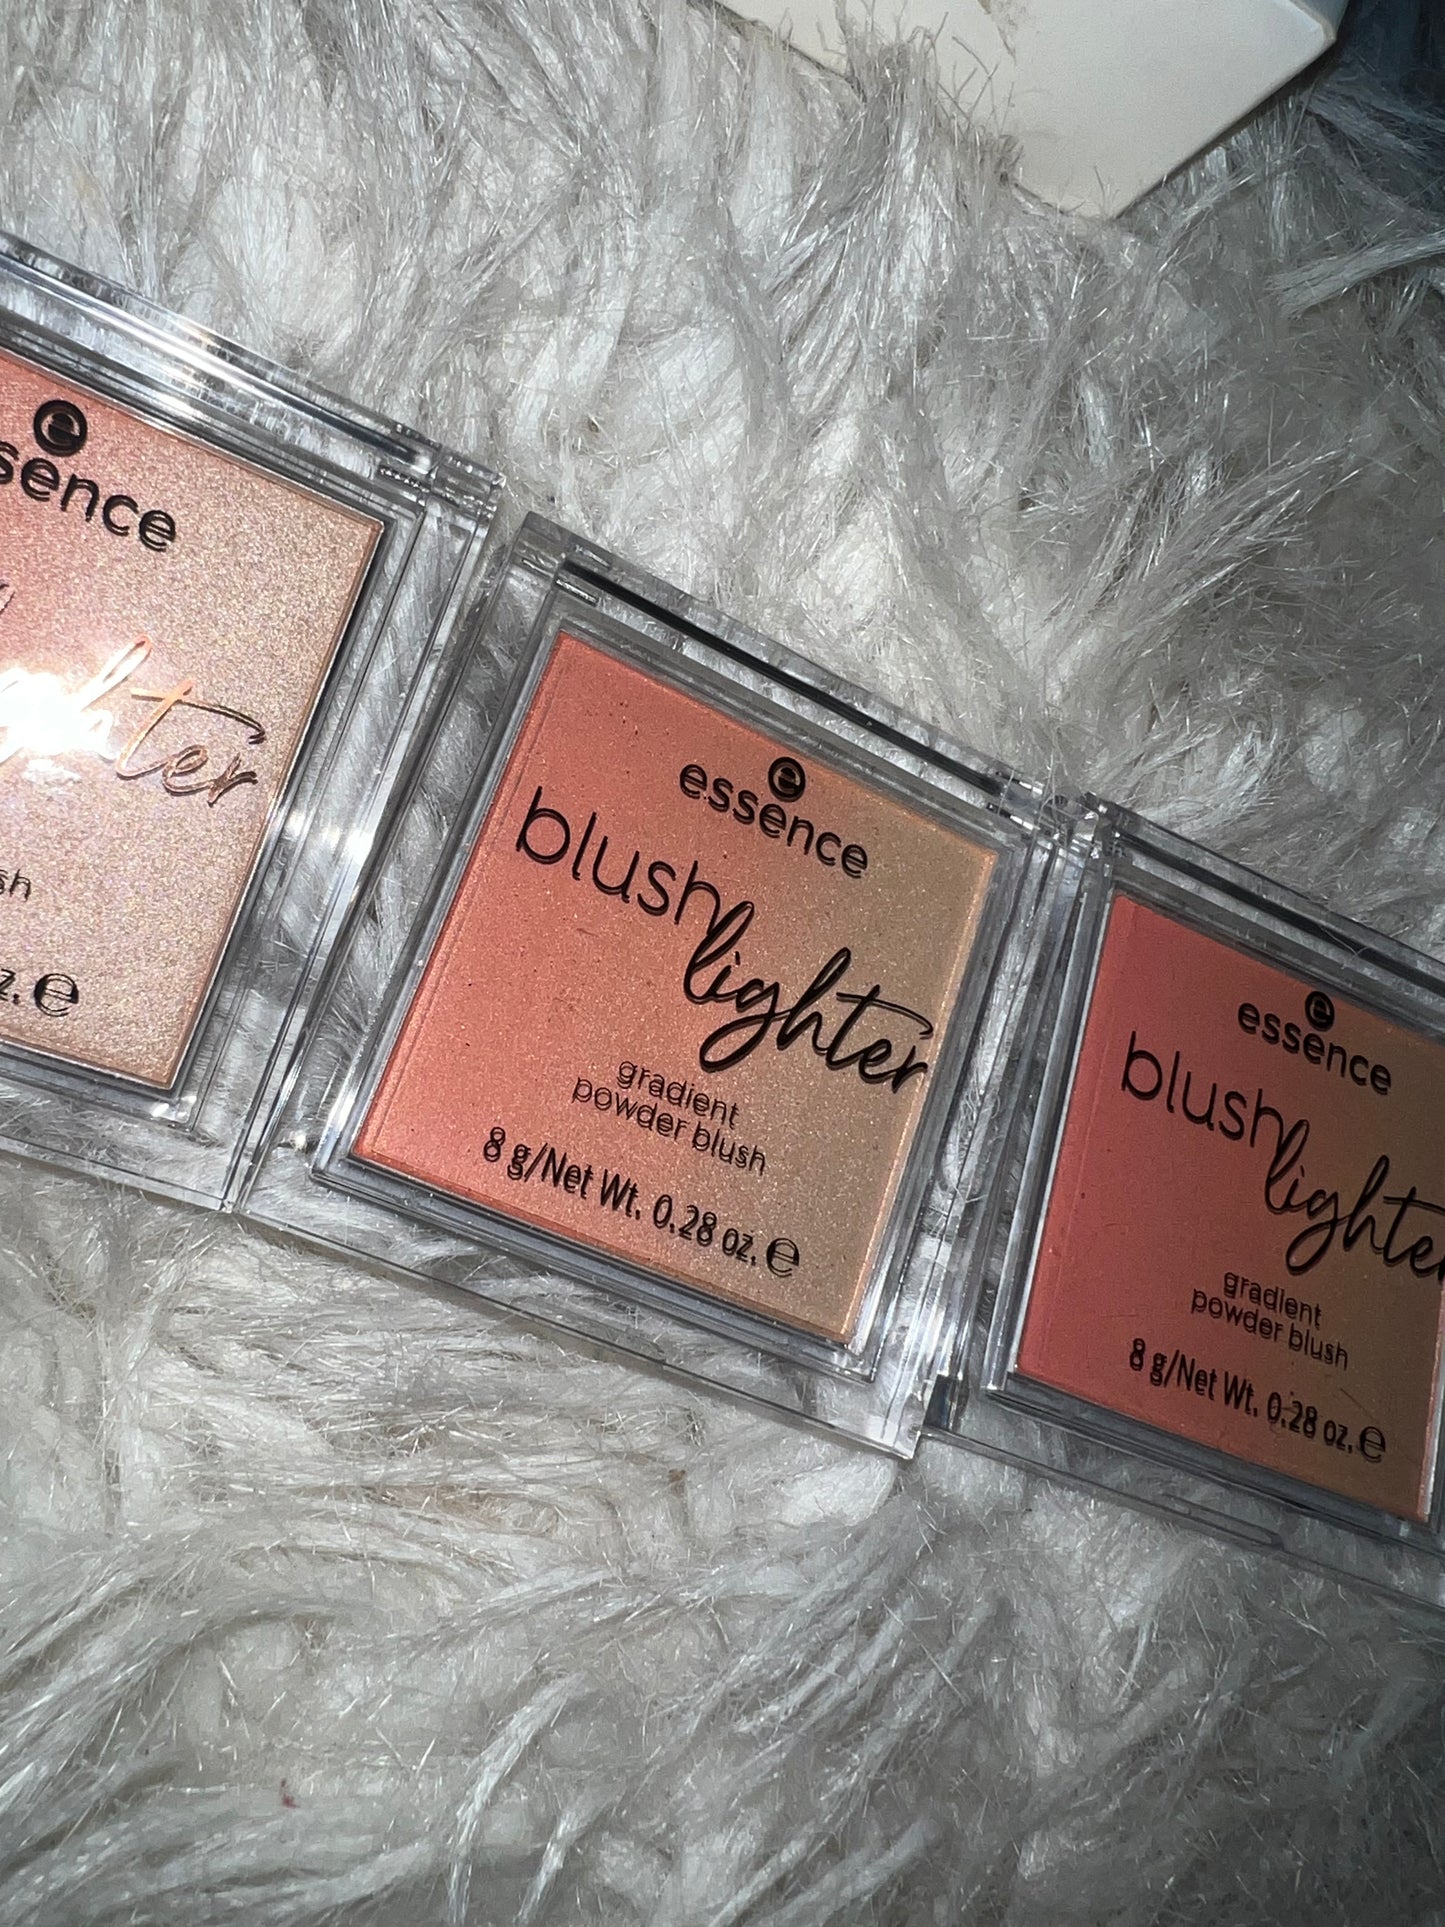 Blush and highlighters